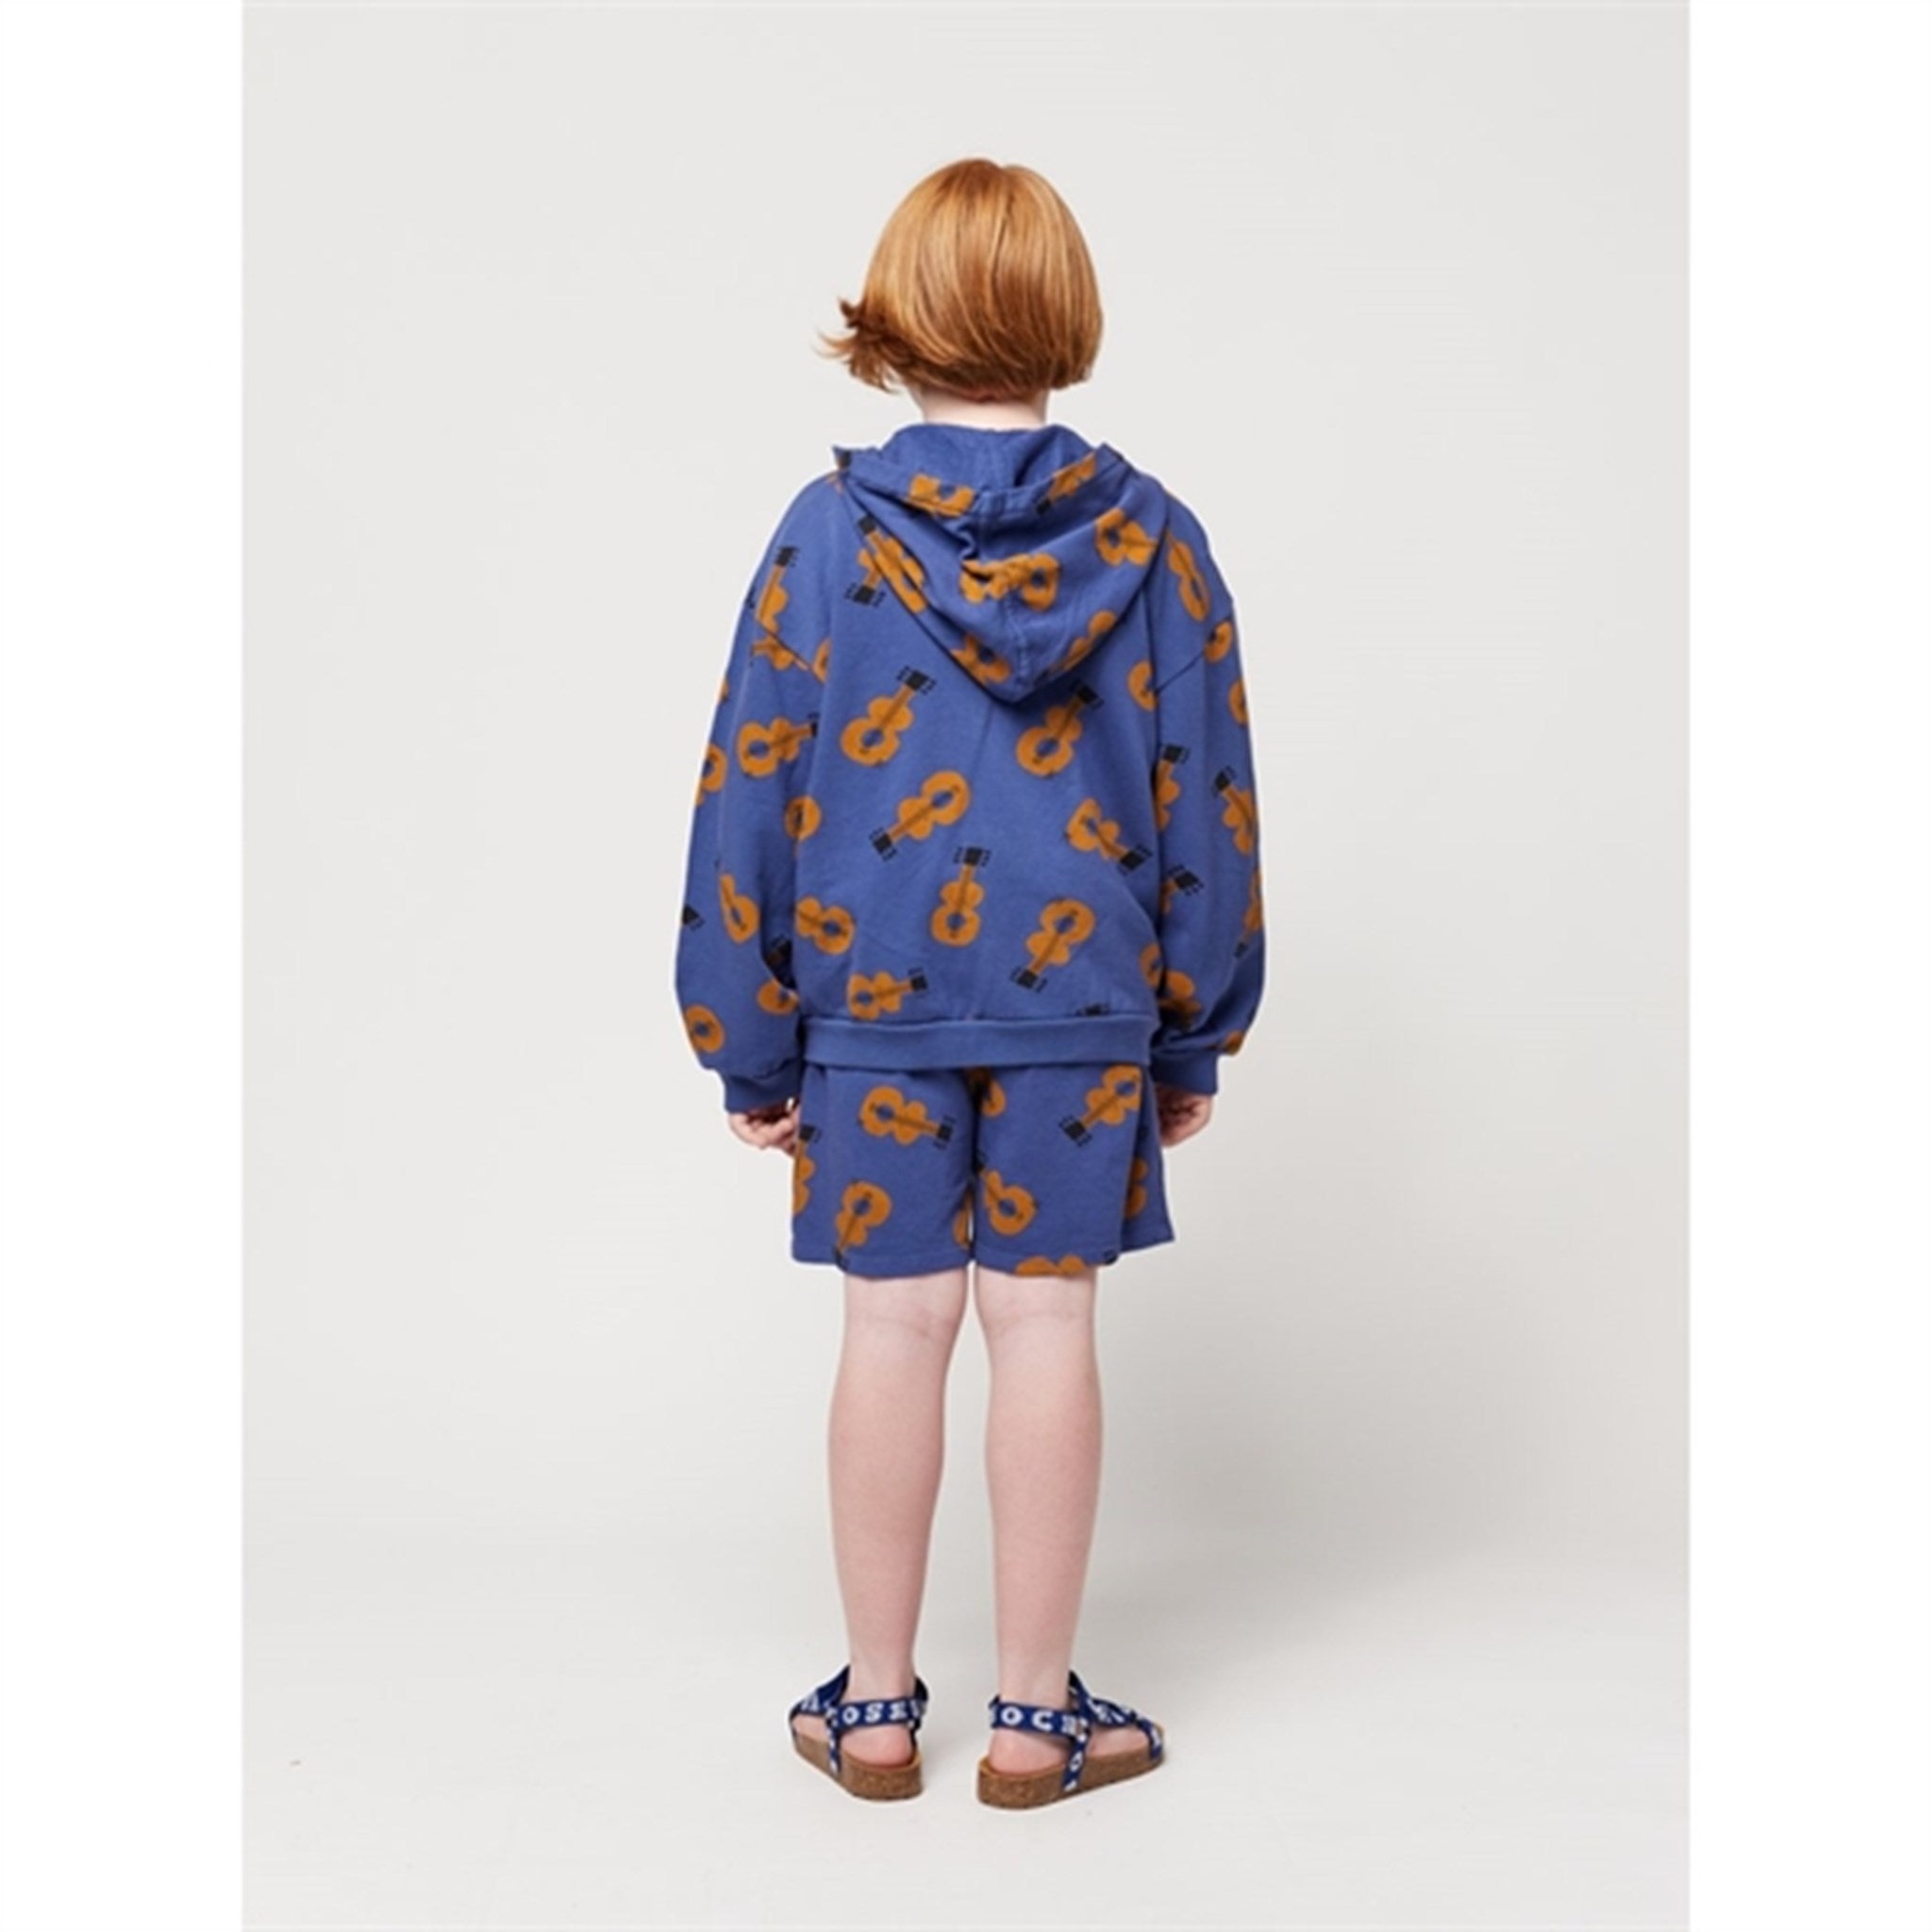 Bobo Choses Acoustic Guitar All Over Zipped Hoodie Navy Blue 6